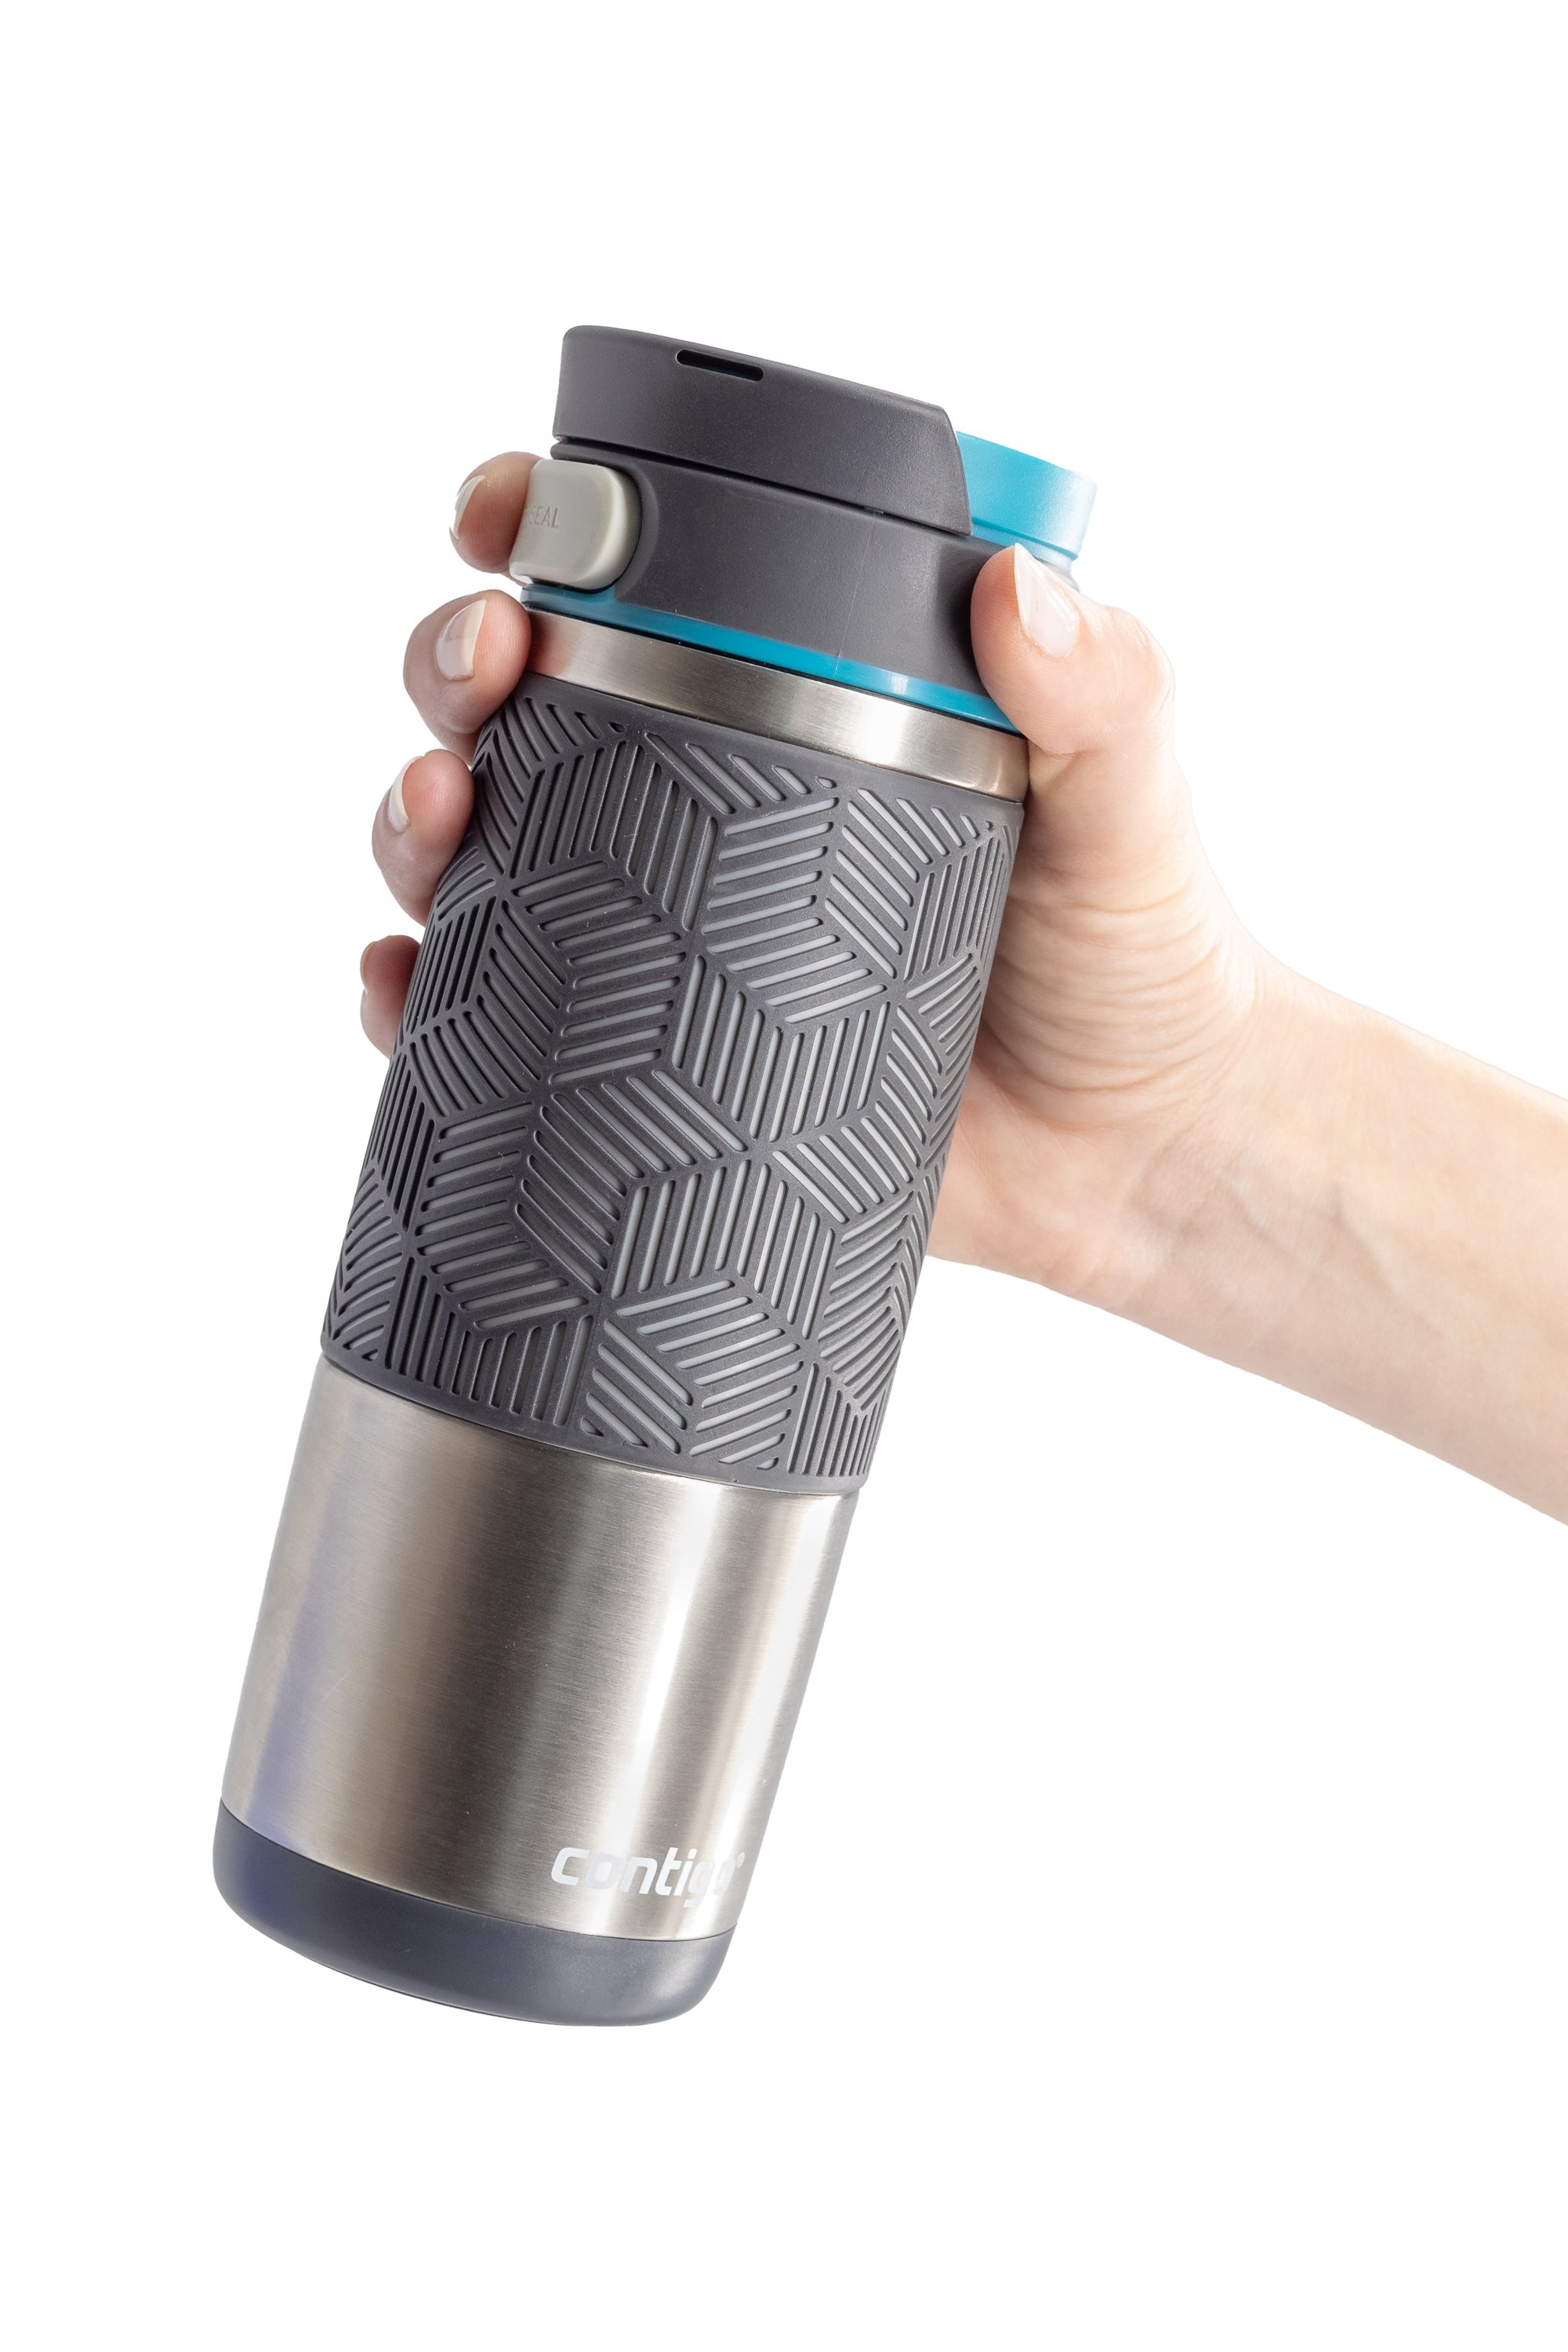 Replacement nut Contigo Luxe 360ml - Stainless Steel, Accessories